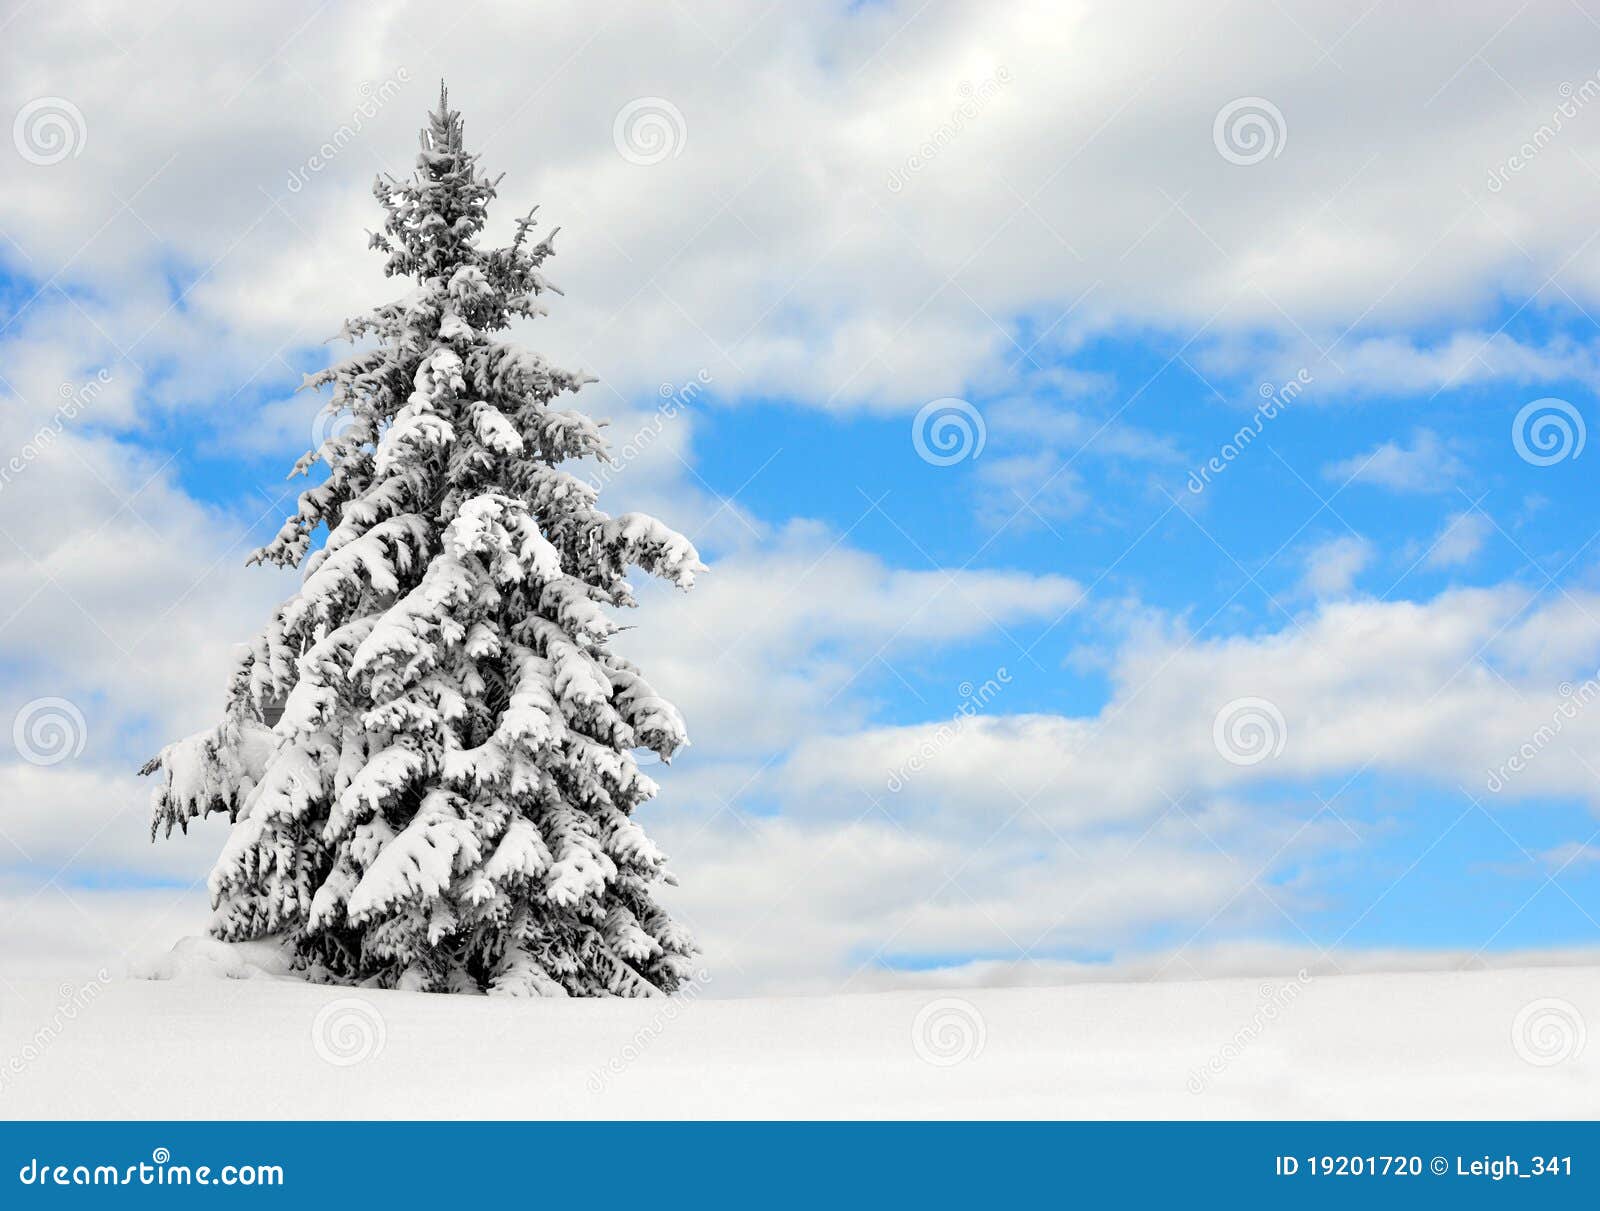 evergreen in the snow